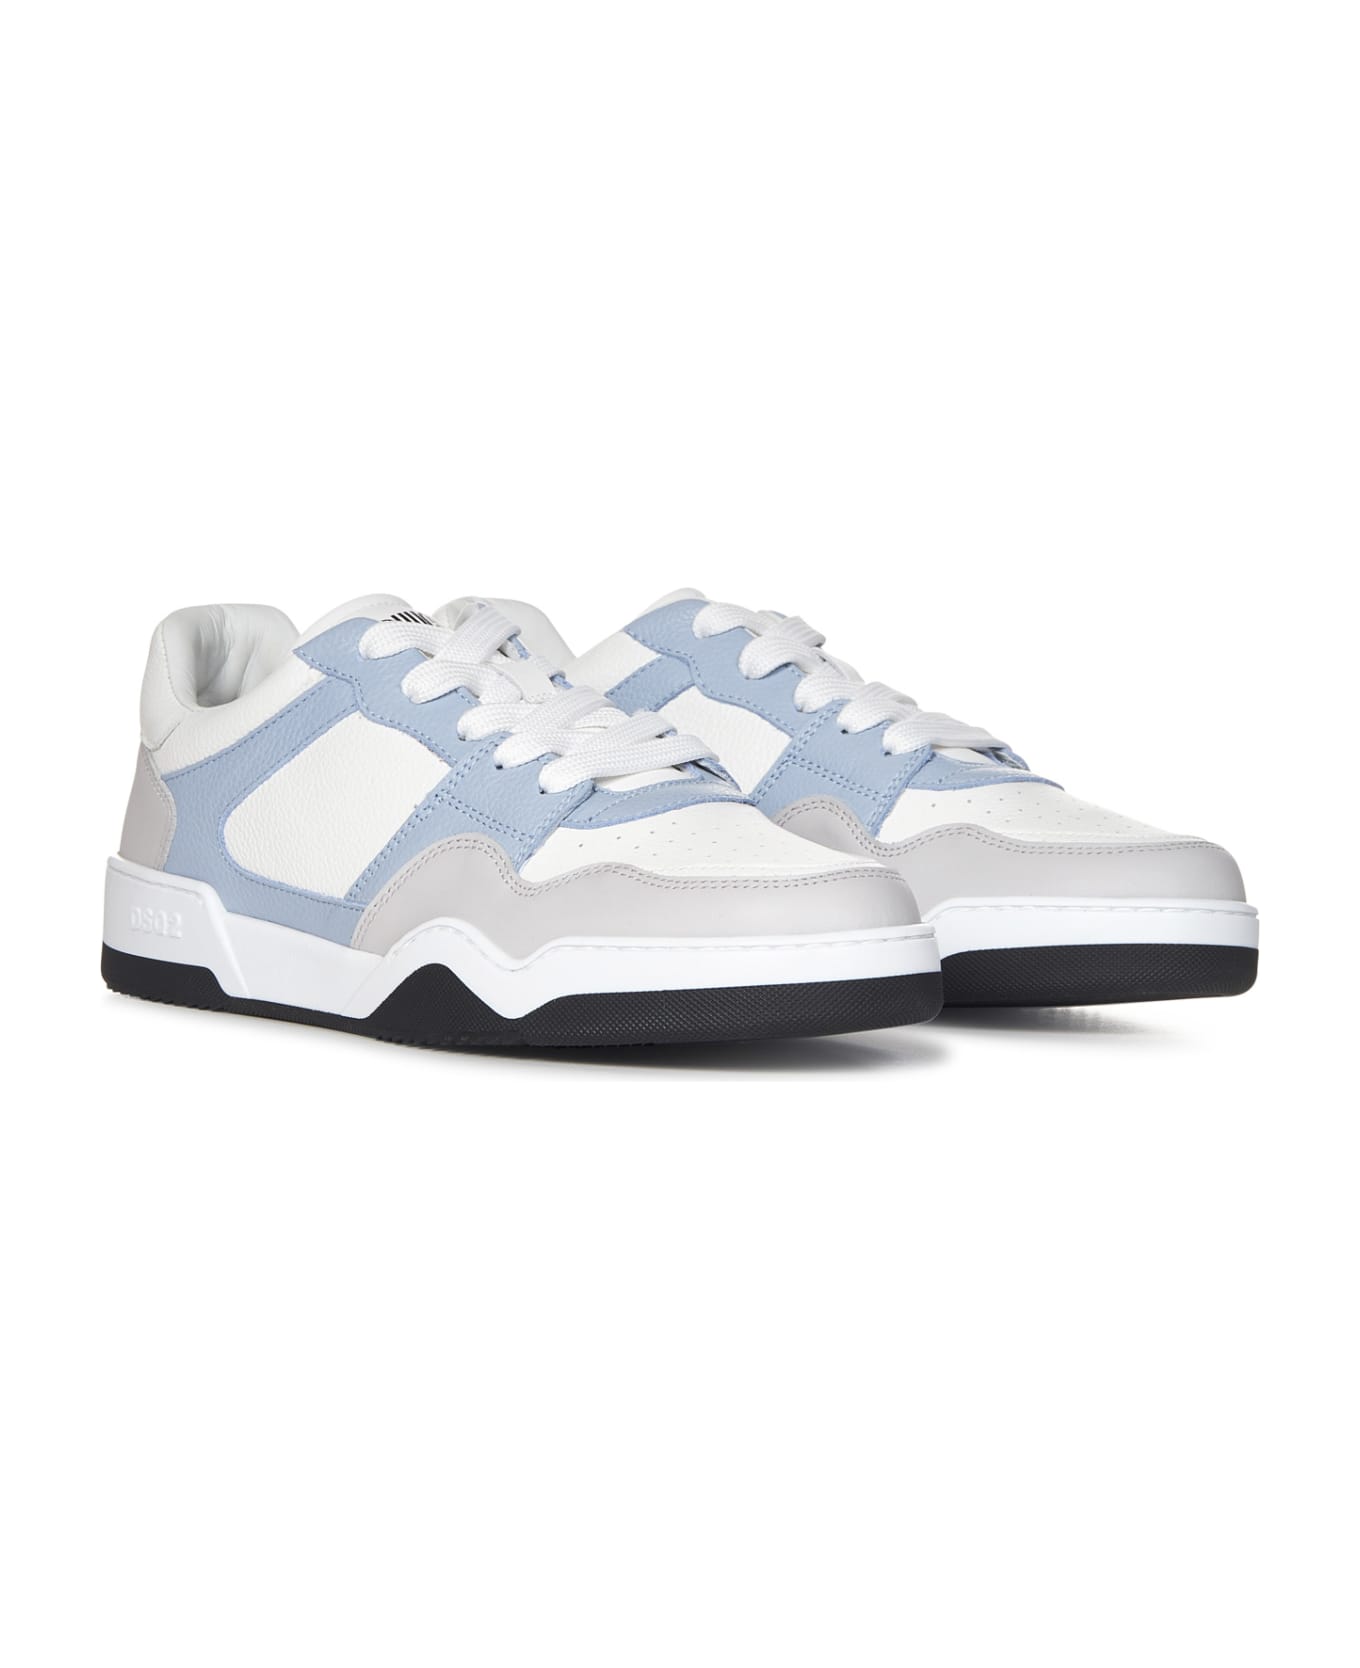 Dsquared2 Spiker Sneakers - White スニーカー